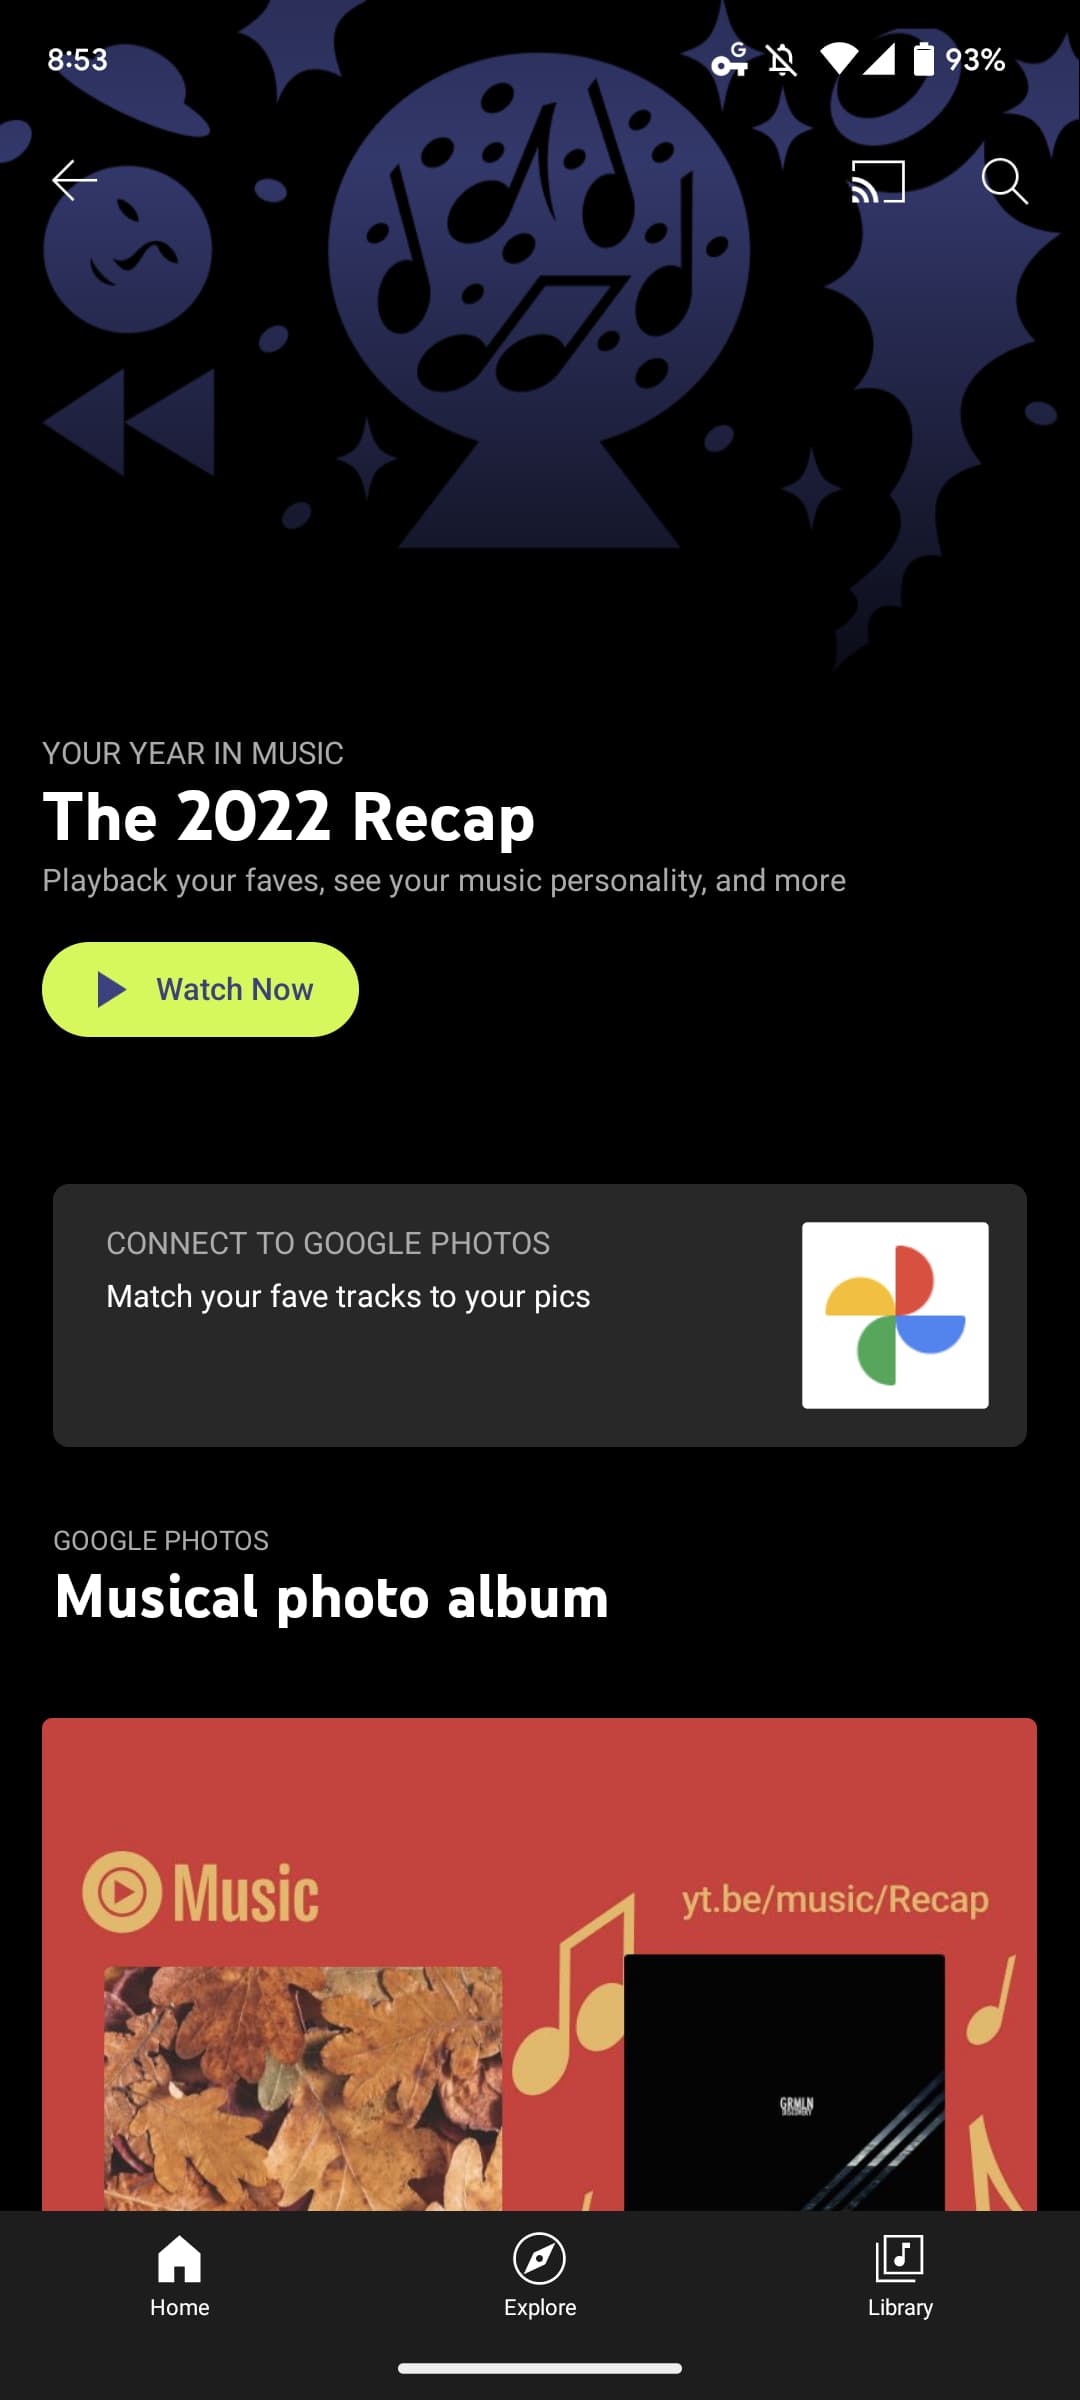 YouTube Music rolls out 2022 Recap with personalized stories [U: More stats in email]